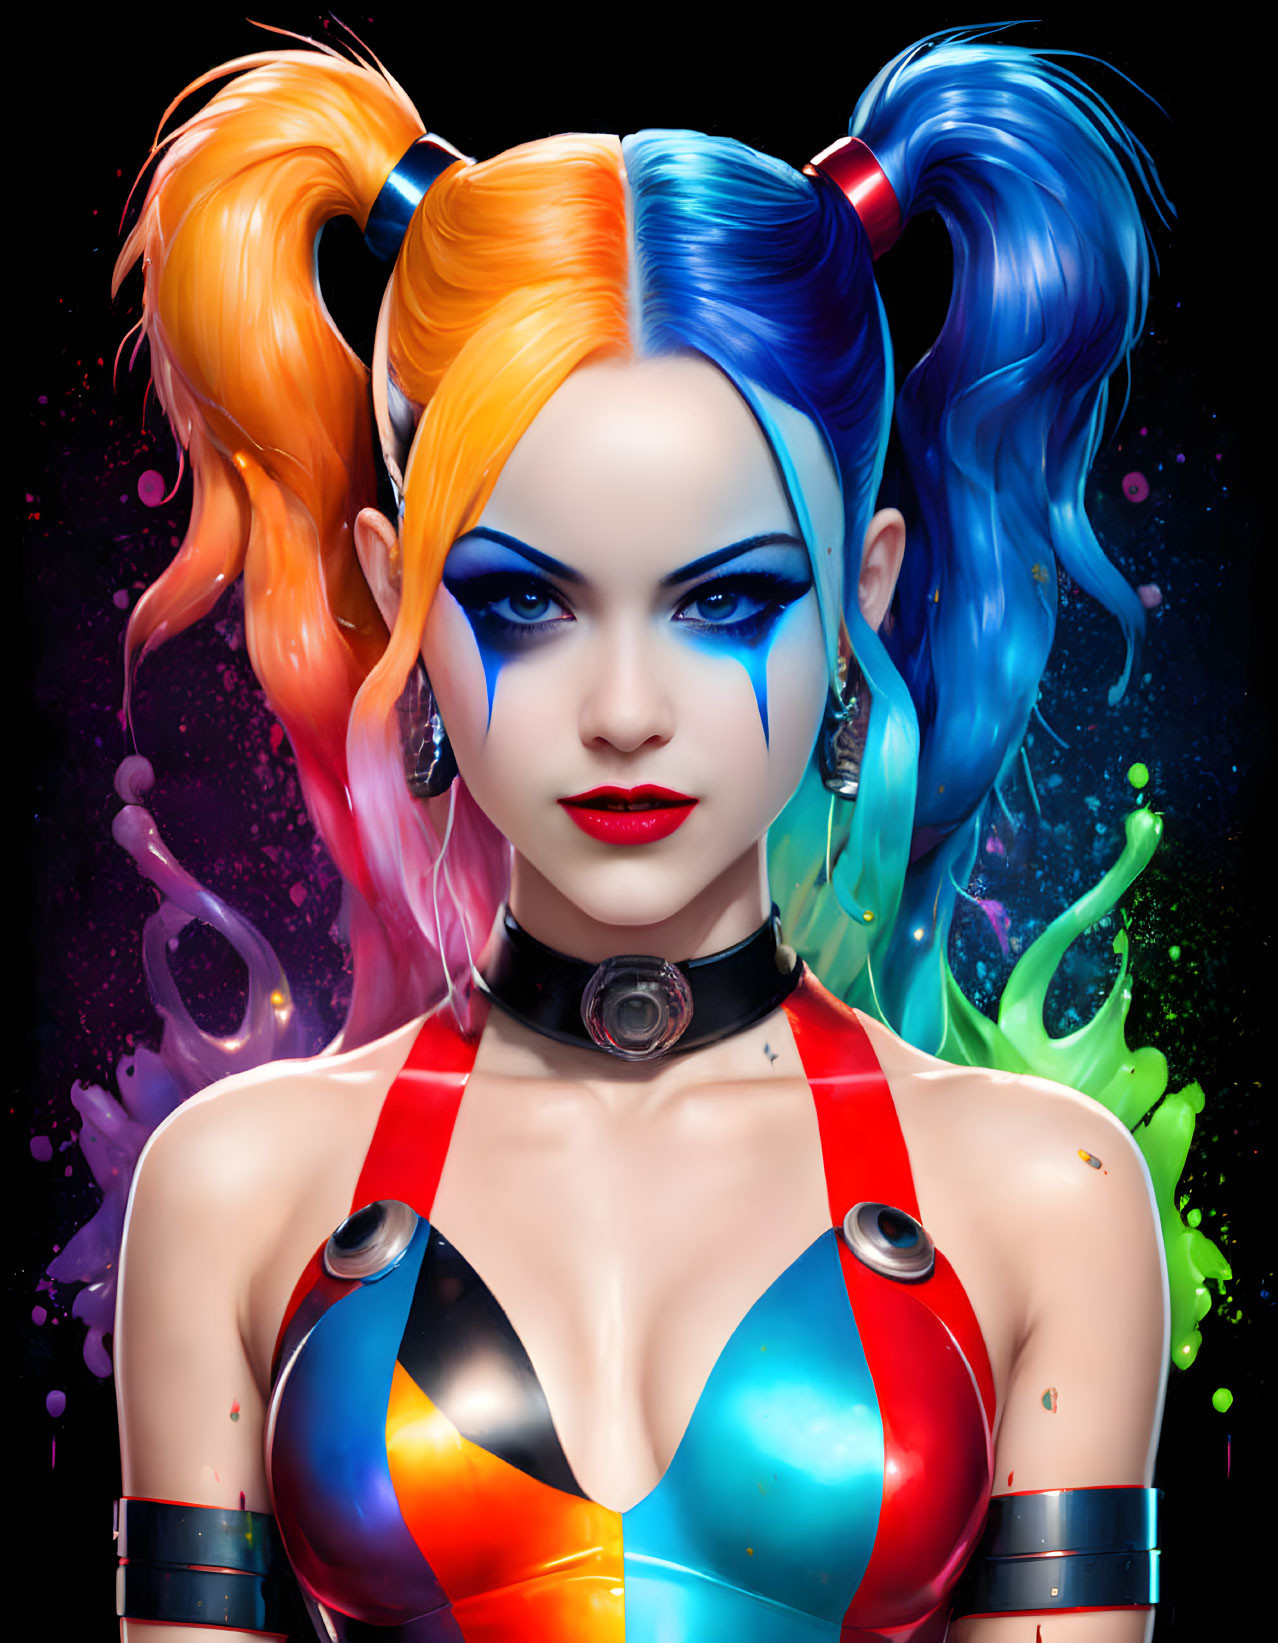 Colorful Hair and Striking Makeup on Woman in Futuristic Outfit